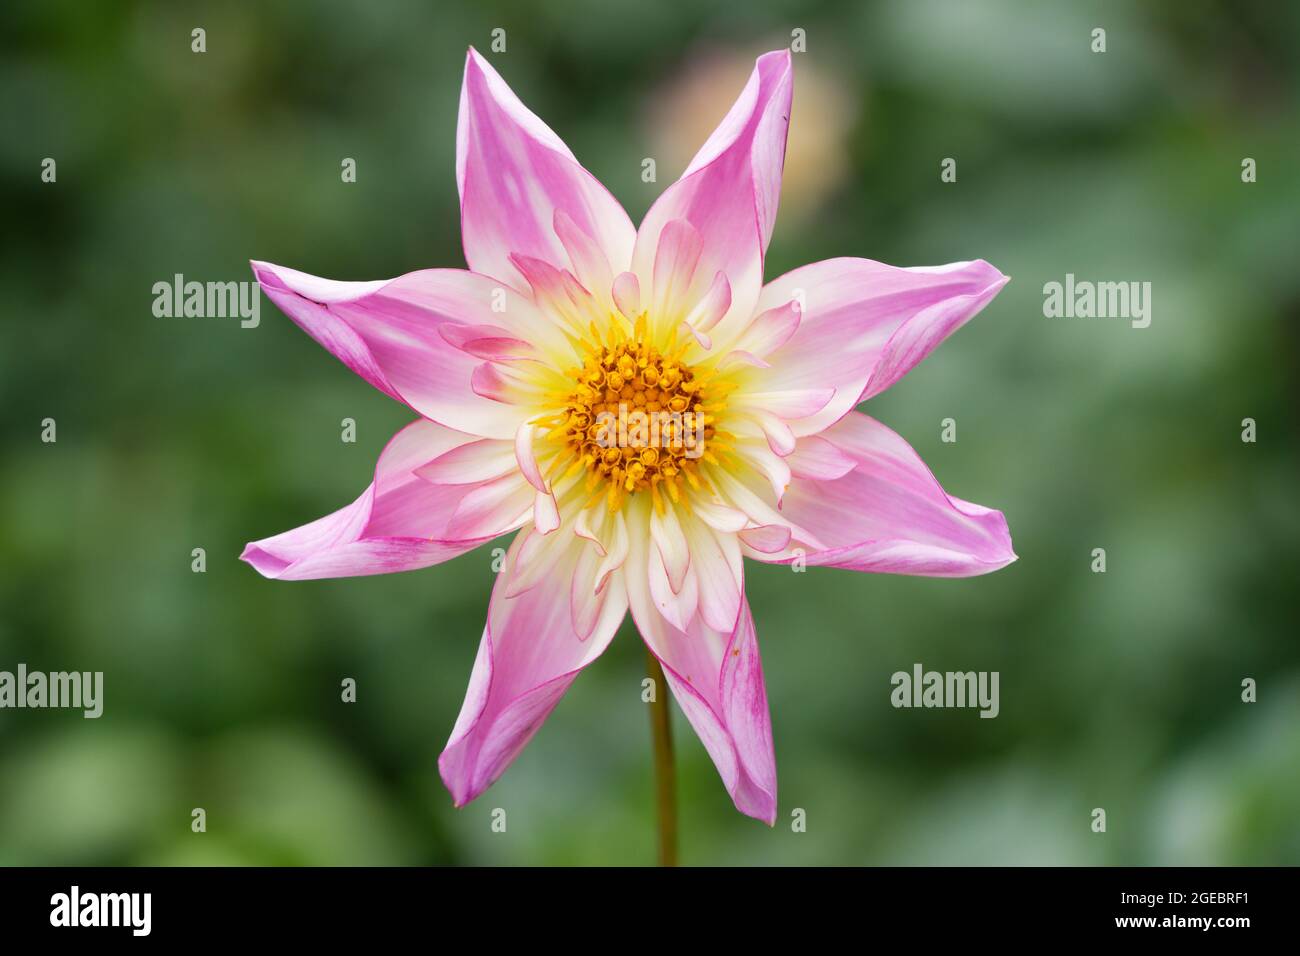 portrait view of pink white dahlia against blurred background Stock Photo